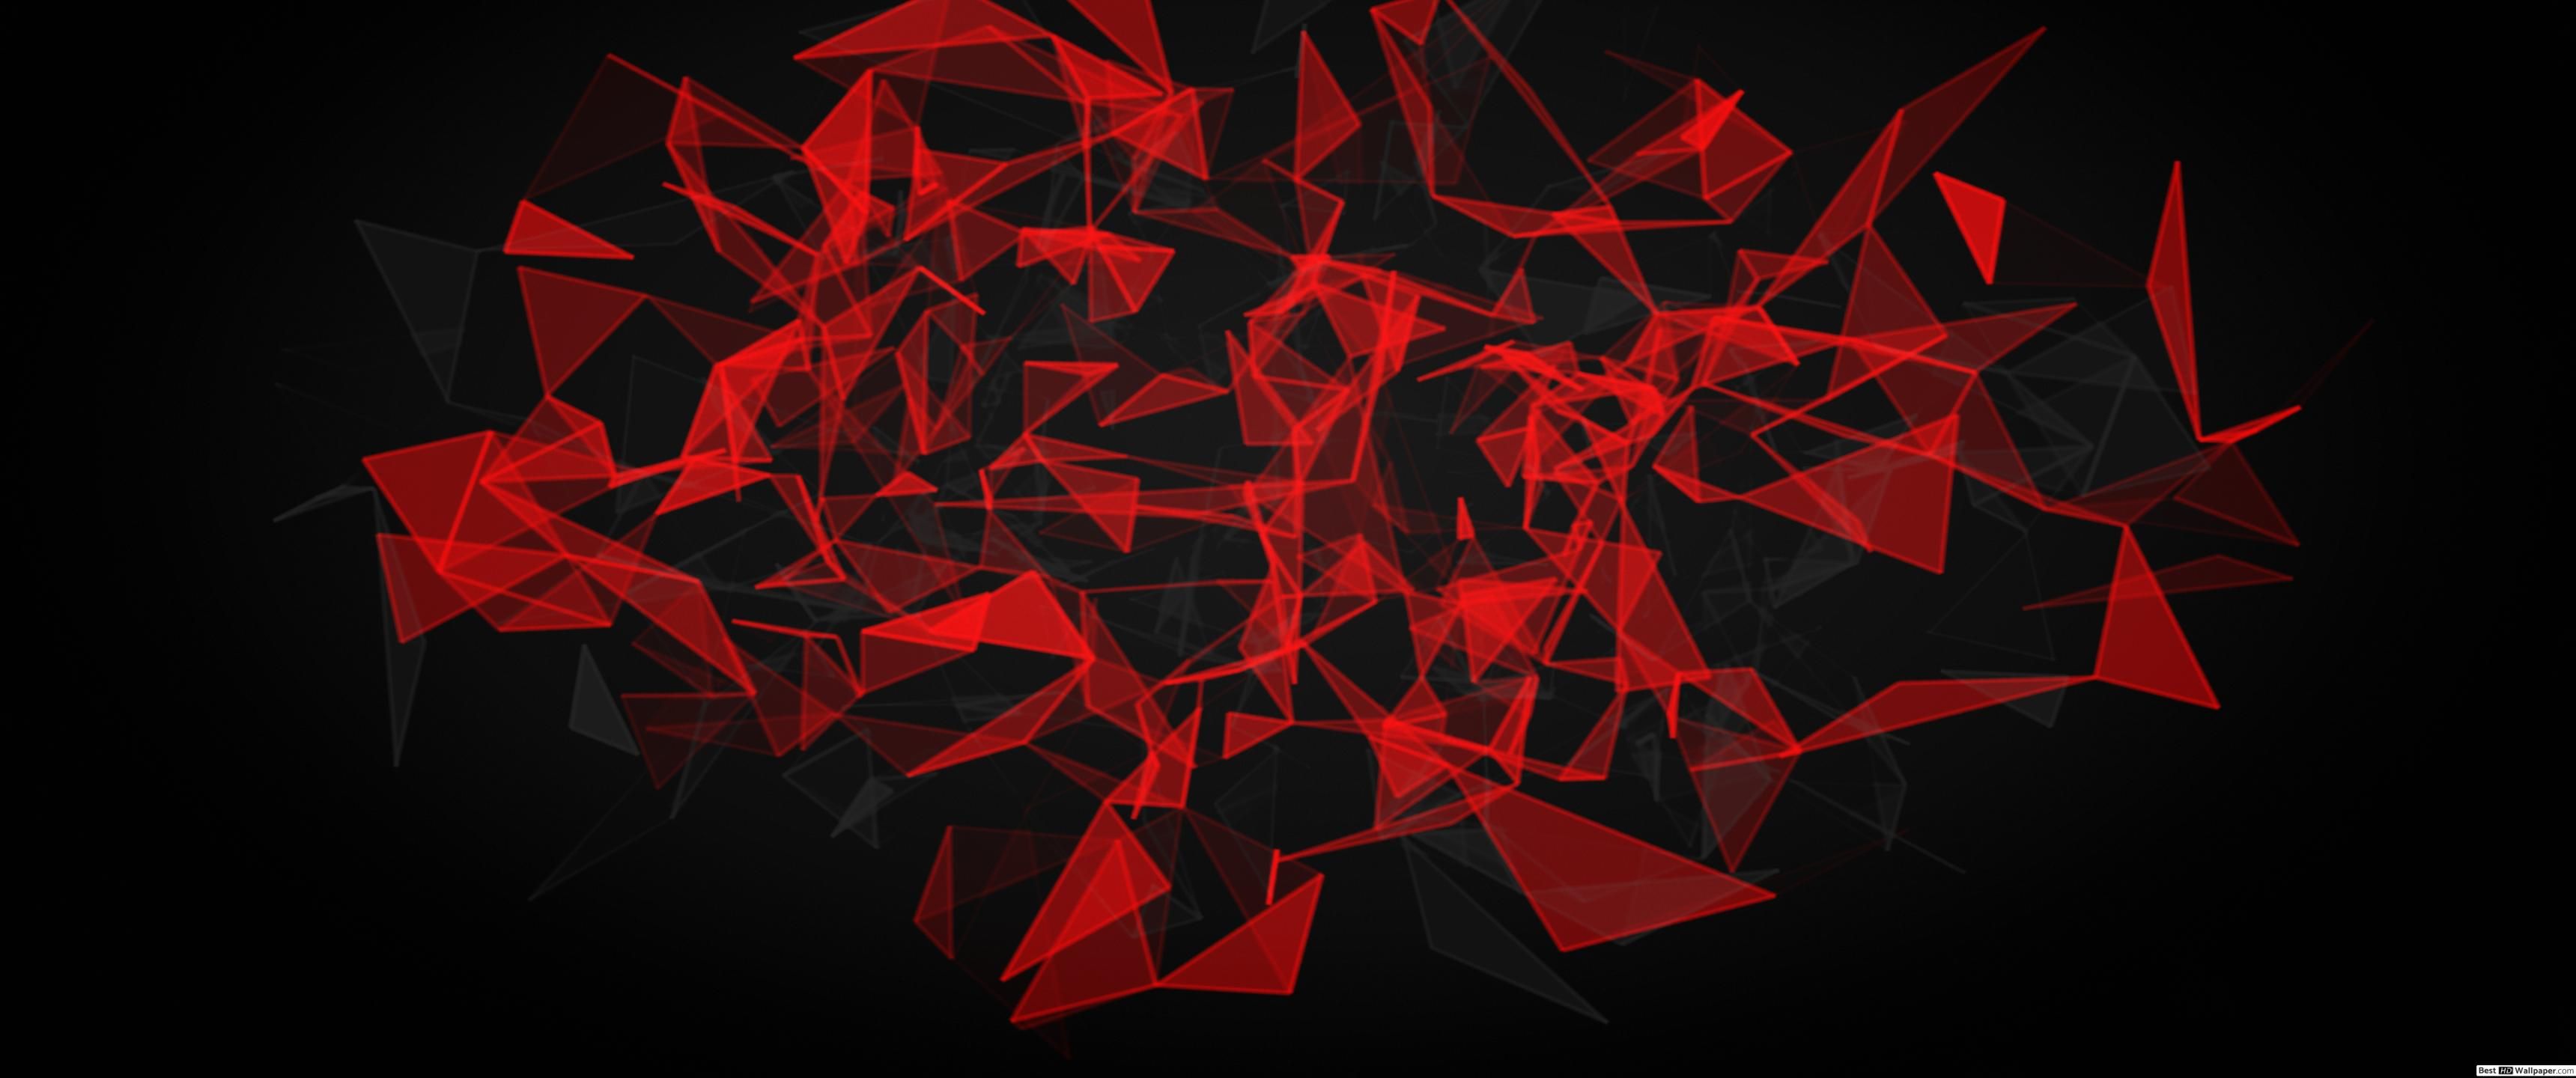 Fierce red abstract minimalist background HD wallpaper download